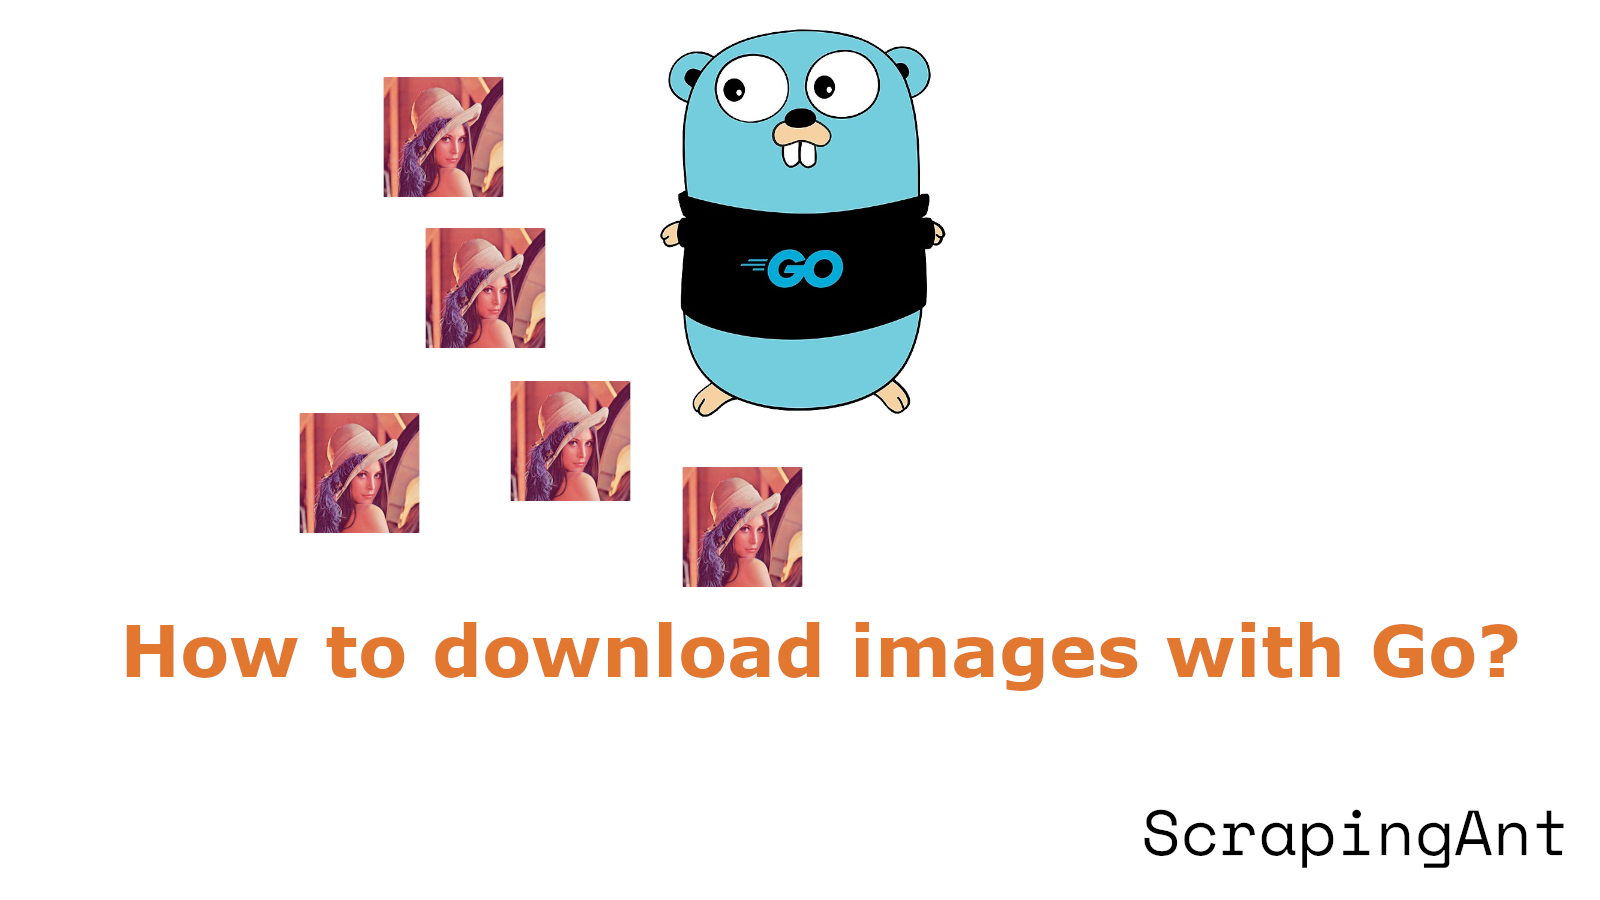 How to download images with Go?